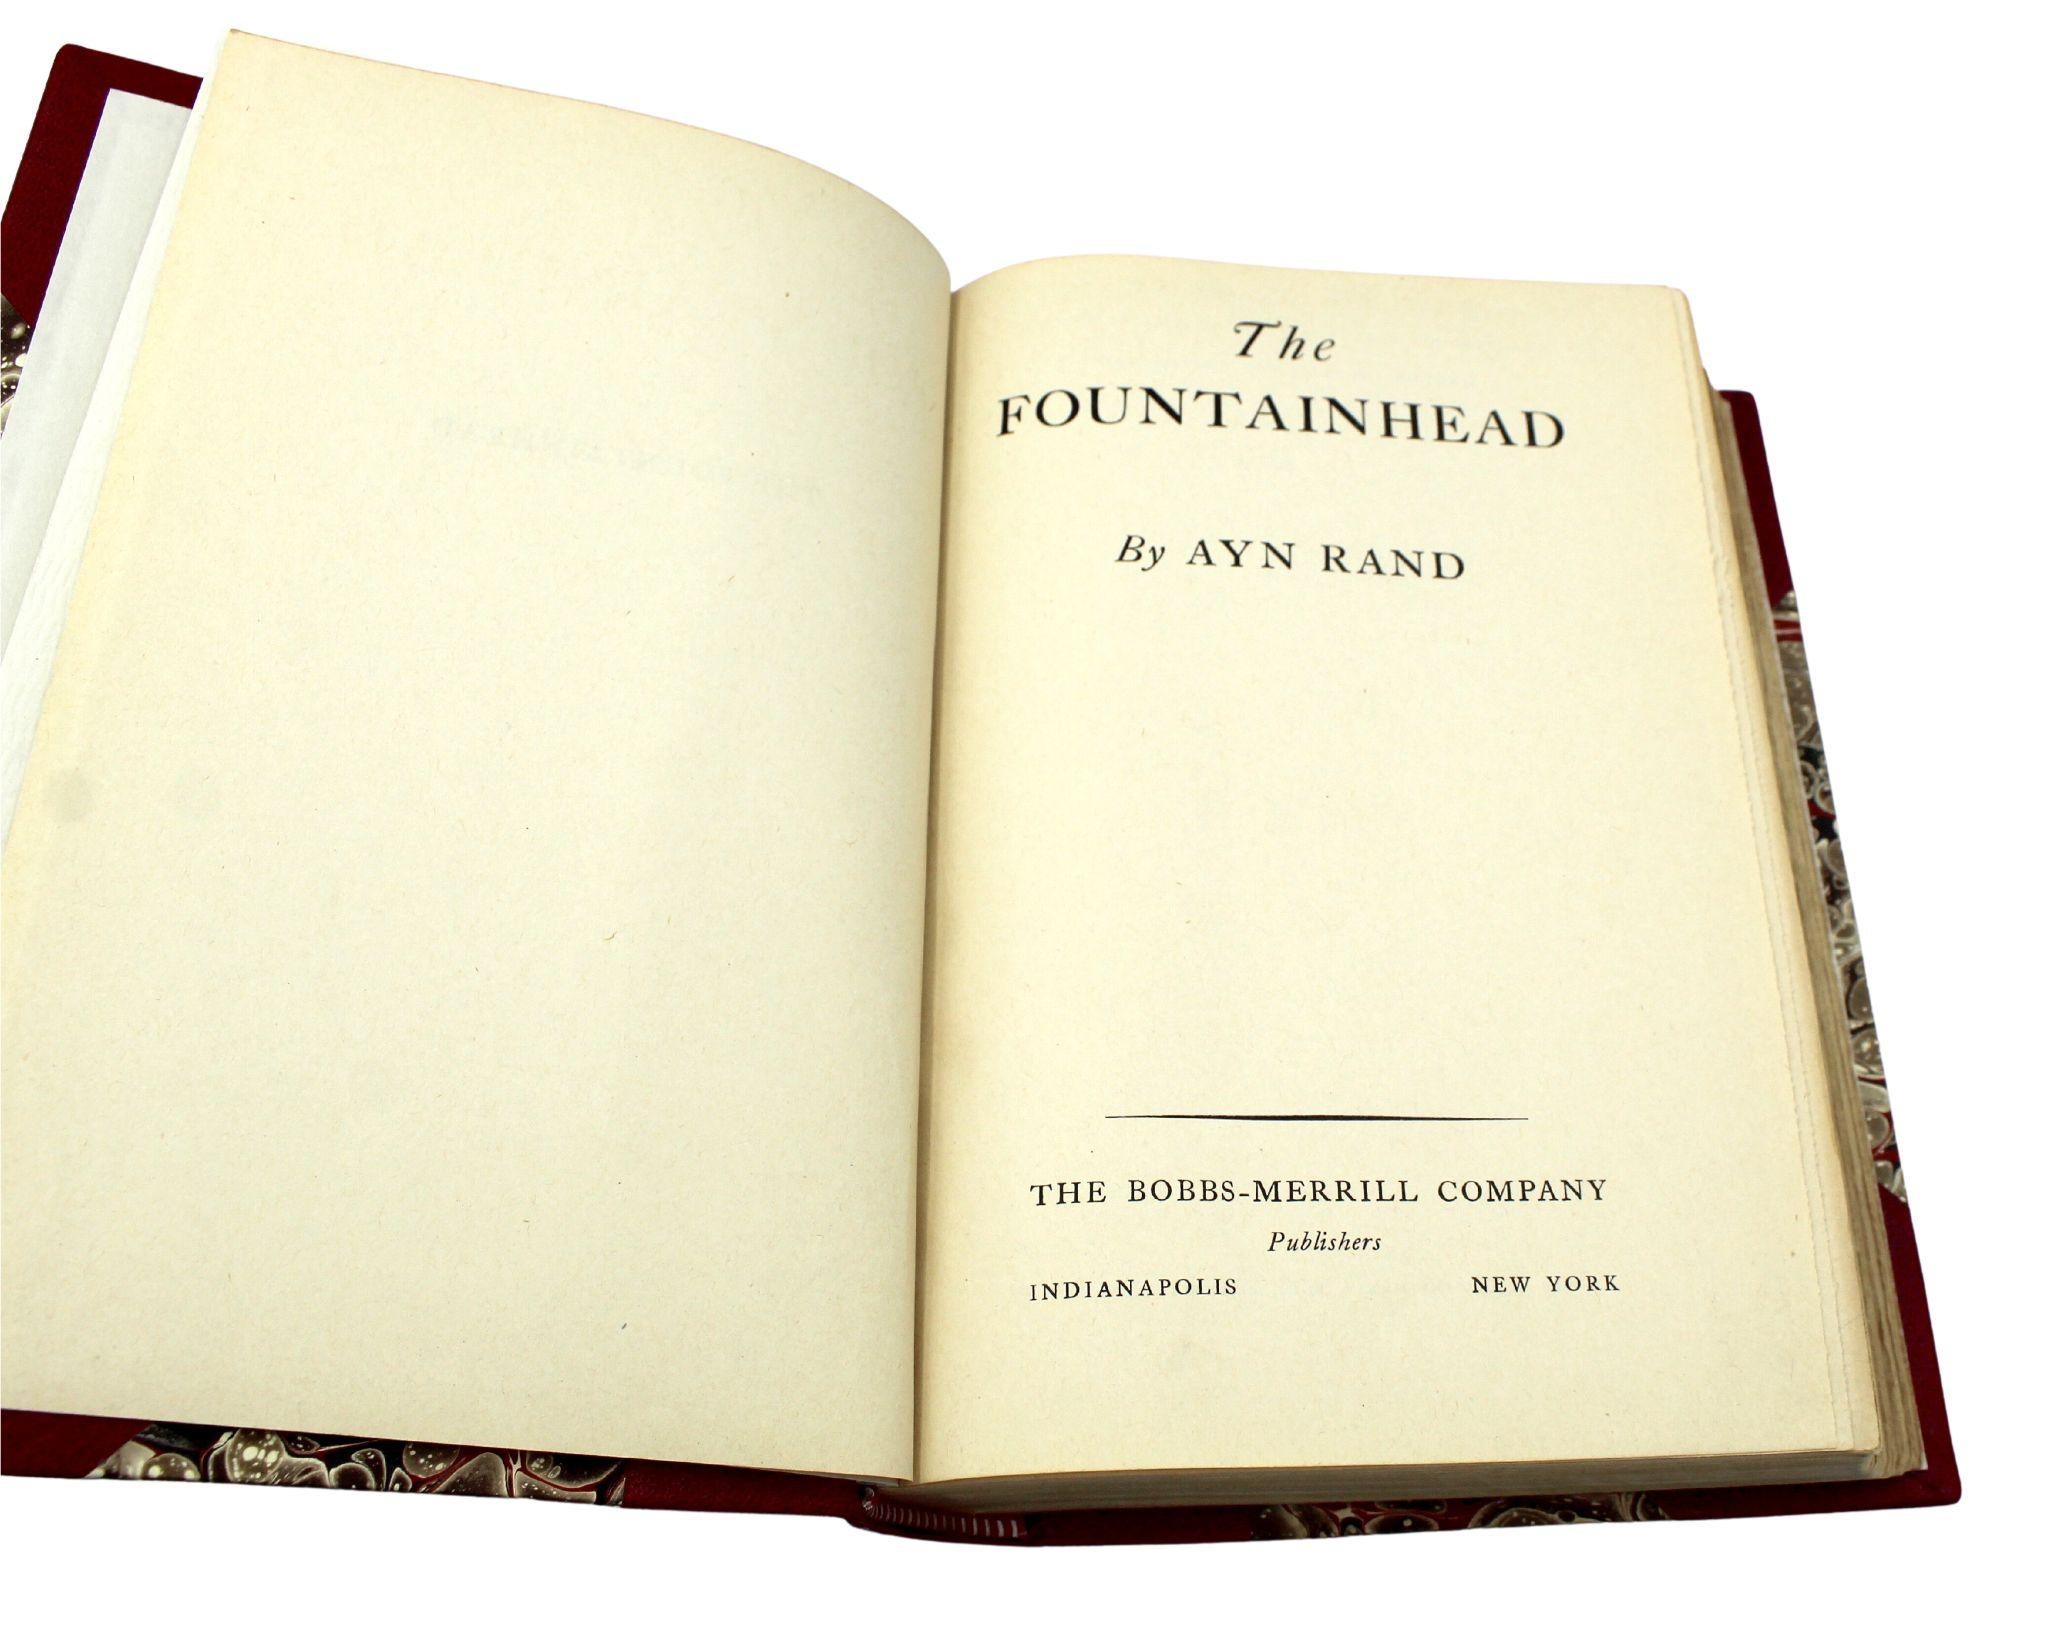 Rand, Ayn. The Fountainhead. New York: The Bobbs-Merrill Company, 1943. First edition printing. Octavo. Rebound in modern half red Moroccan leather and marbled boards, with gilt tooling and titles to the spine, and the original dust jacket bound-in.